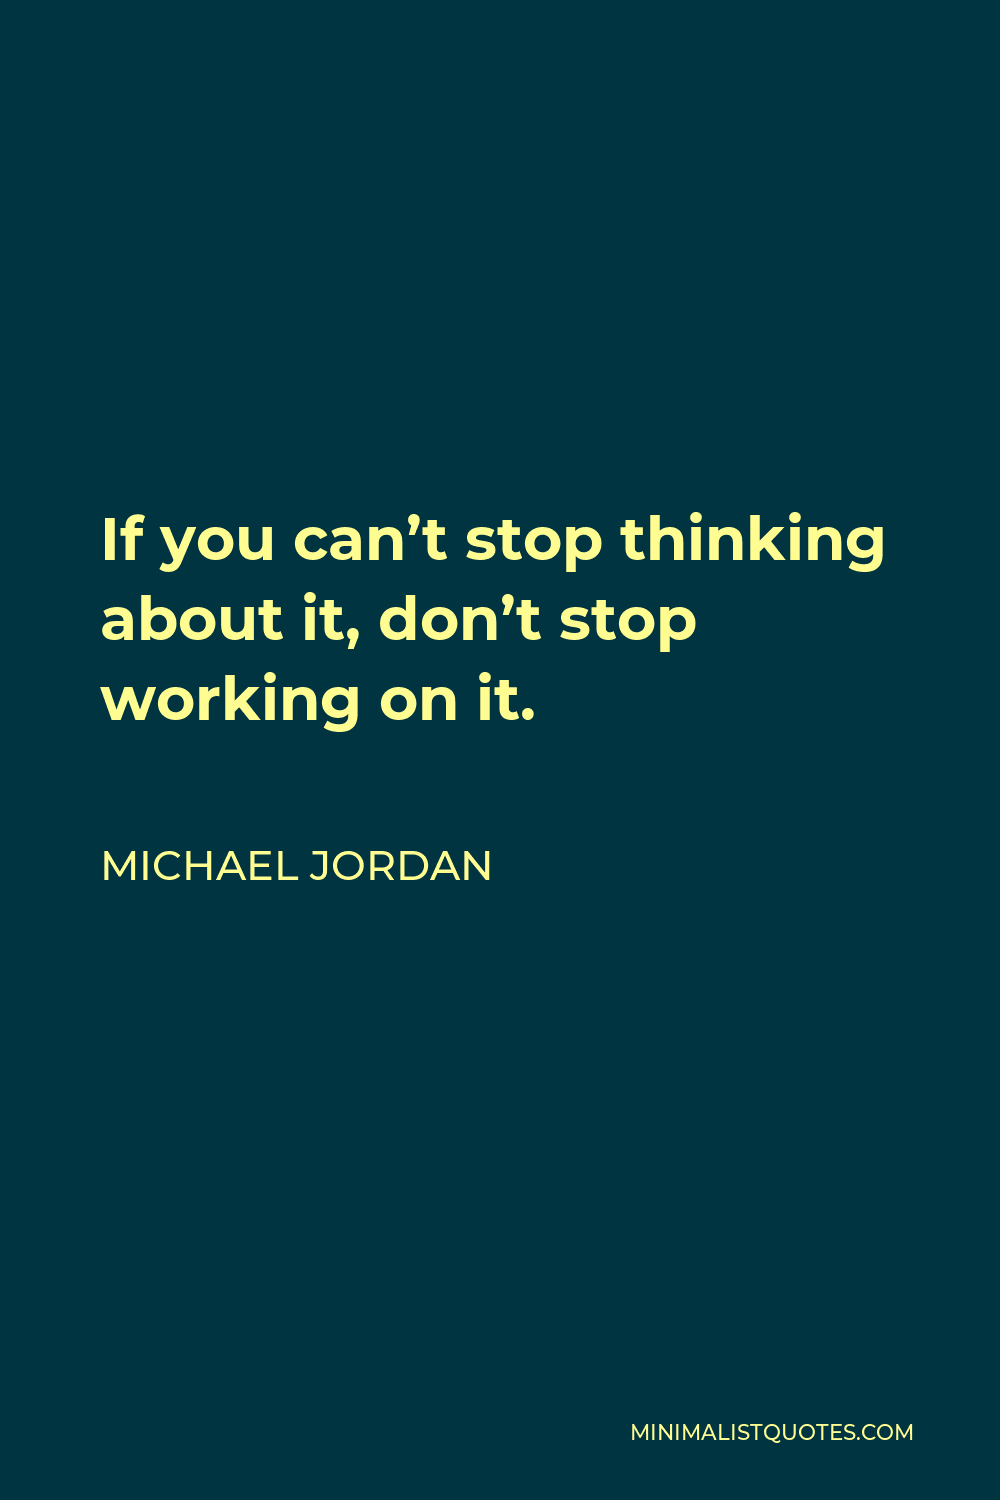 Michael Jordan Quote - If you can’t stop thinking about it, don’t stop working on it.